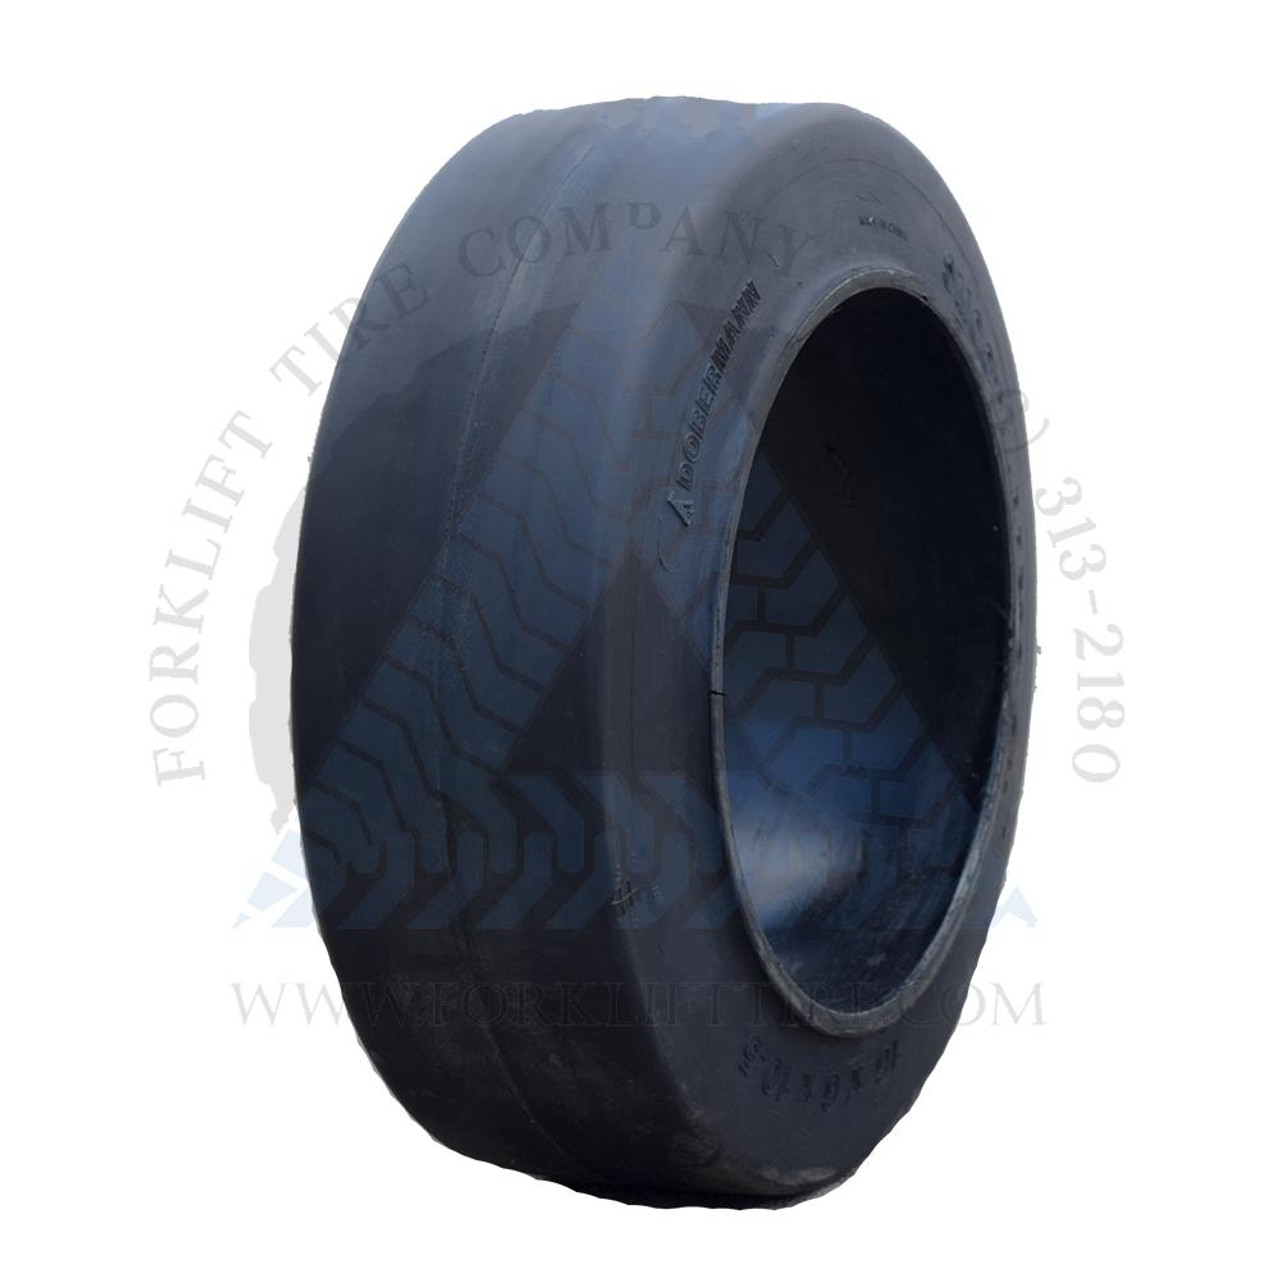 https://cdn11.bigcommerce.com/s-d0v5wehe/images/stencil/1280x1280/products/1677/9165/14x5x10-black-rubber-forklift-cushion-solid-tire__37560.1685565183.jpg?c=2